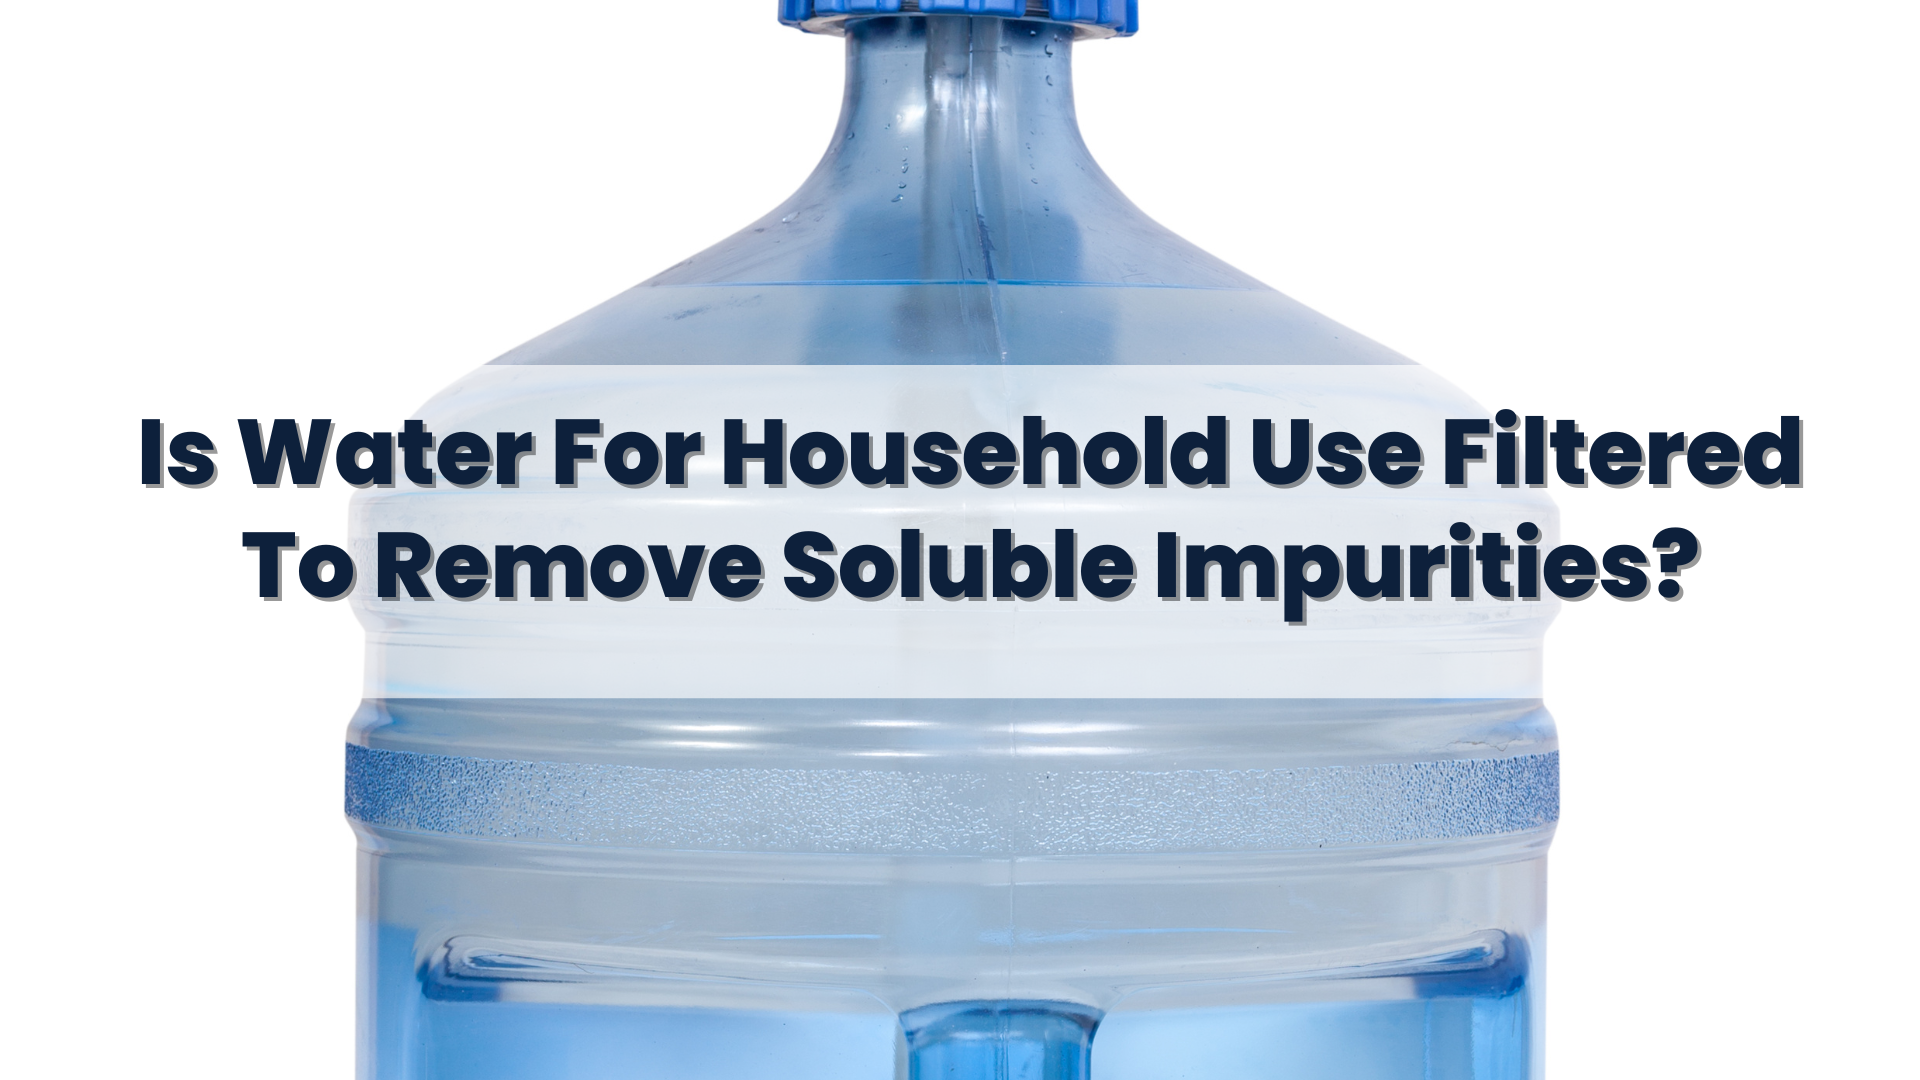 Is water for household use filtered to remove soluble impurities